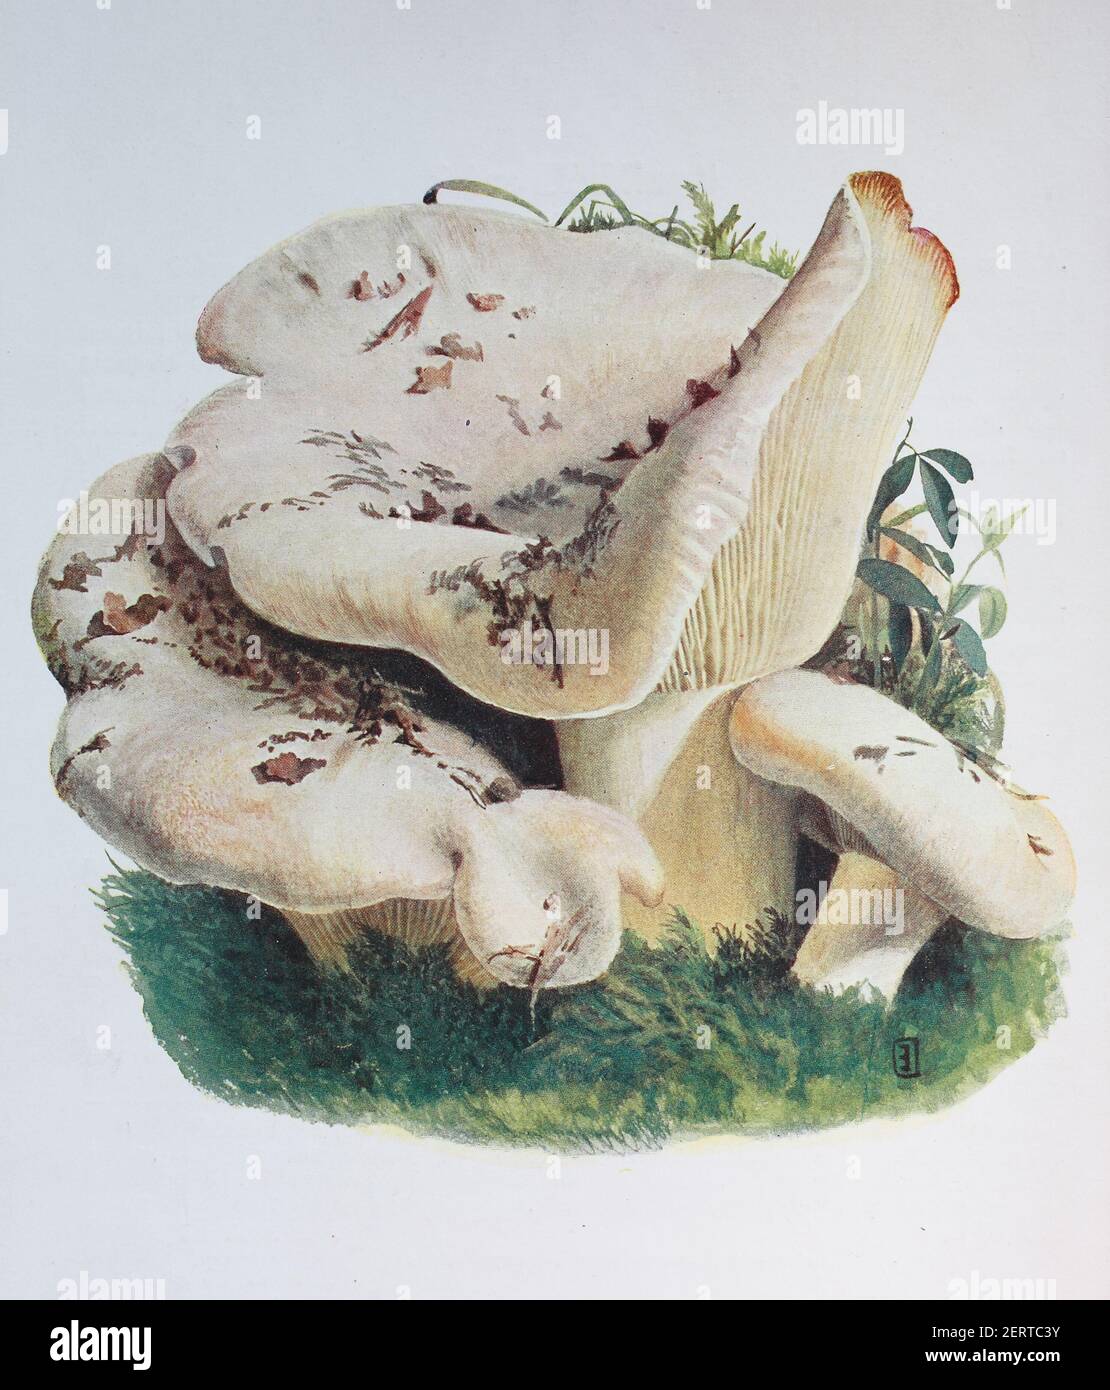 Lactifluus vellereus (formerly Lactarius vellereus), commonly known as the fleecy milk-cap, is a quite large fungus in the genus Lactifluus, digital reproduction of an ilustration of Emil Doerstling (1859-1940) Stock Photo